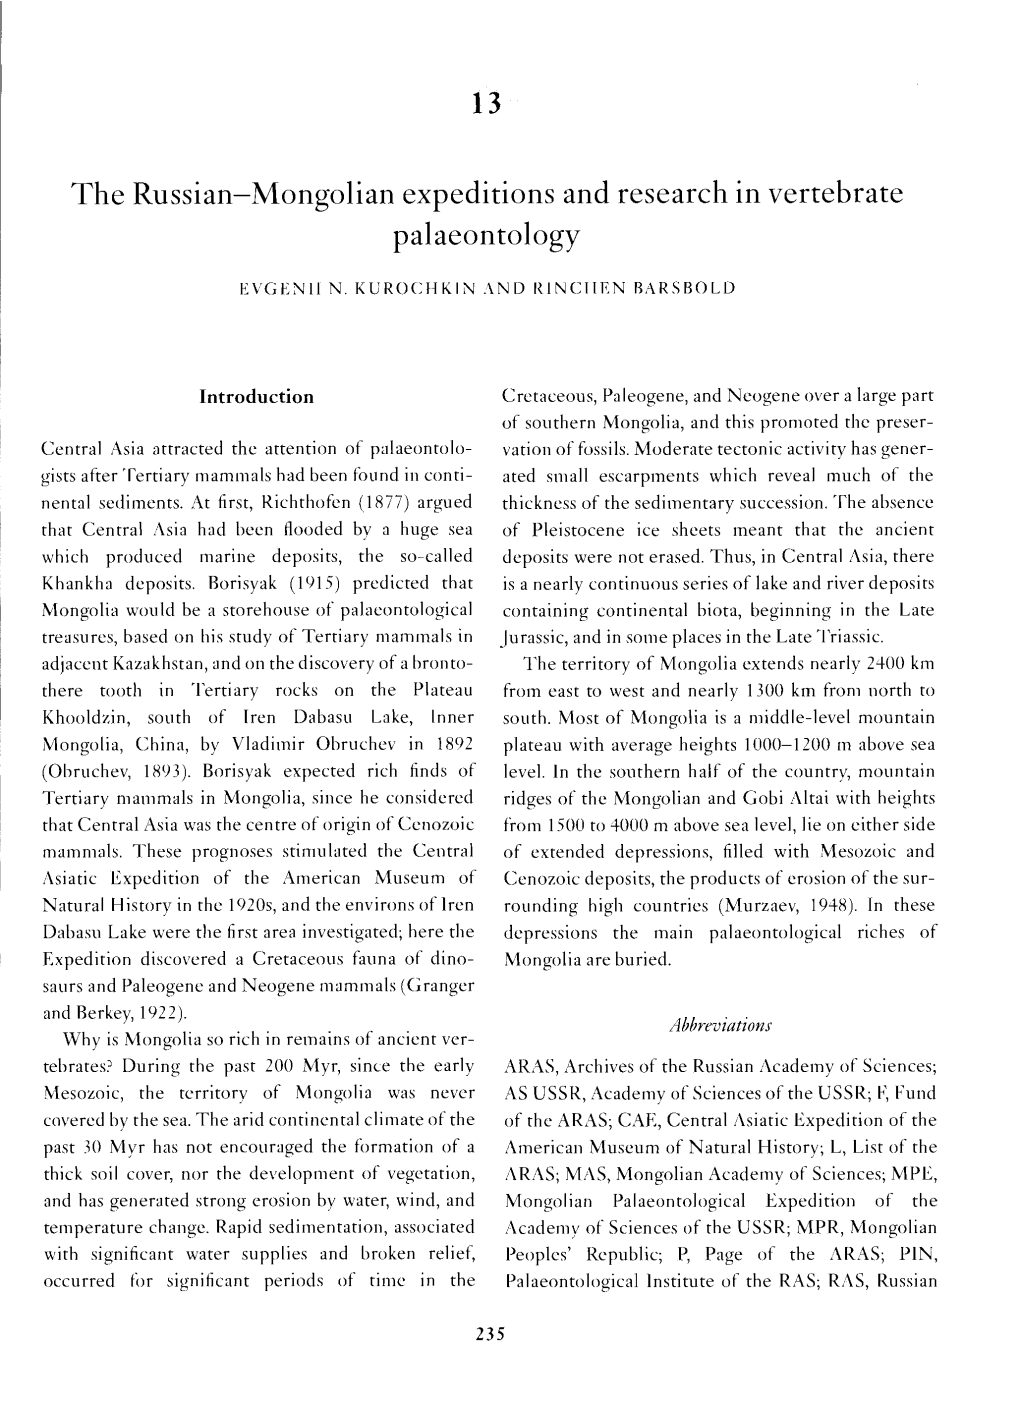 The Russian-Mongolian Expeditions and Research in Vertebrate Palaeontology